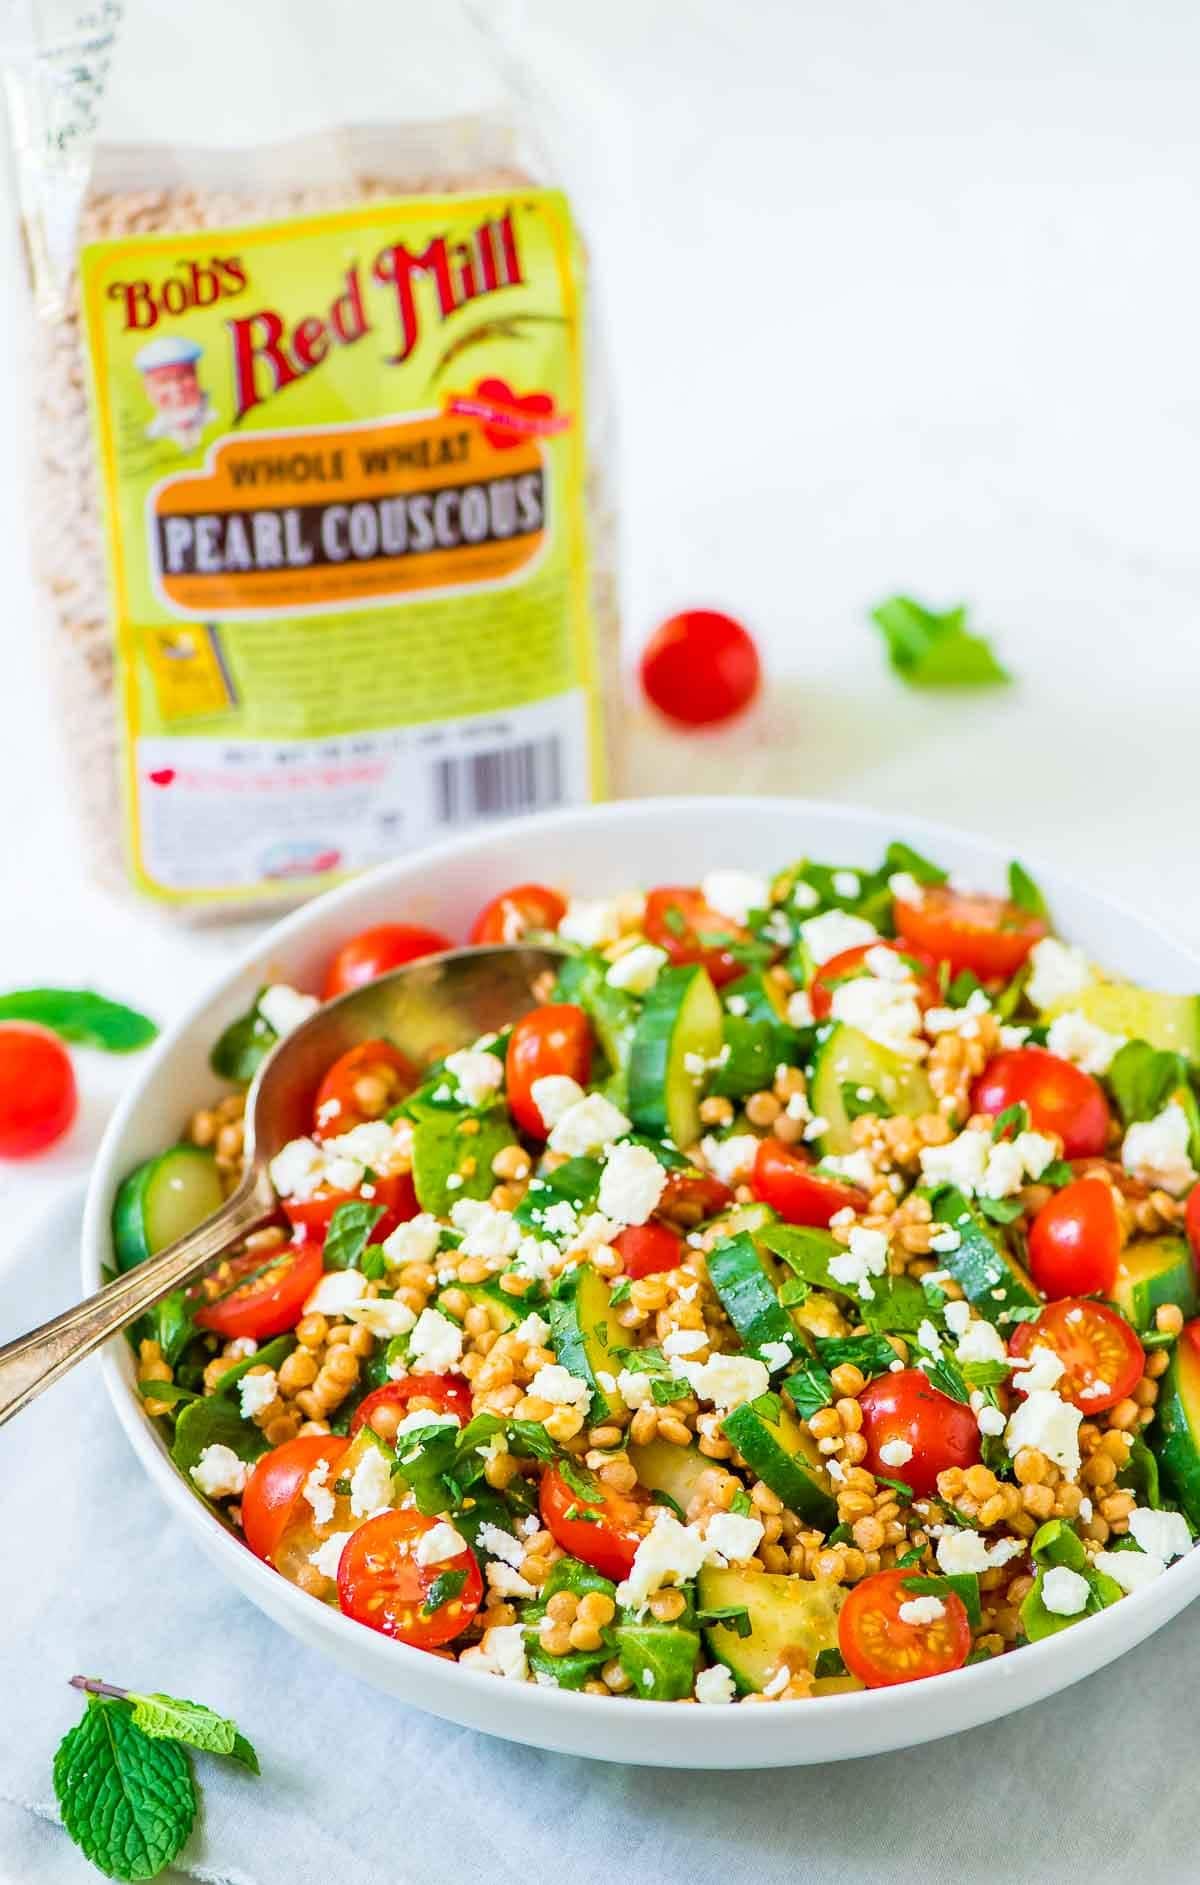 Tomato, Cucumber, and Feta Pearl Couscous Salad in a white bowl, with a bag of Bob's Red Mill pearl couscous behind it